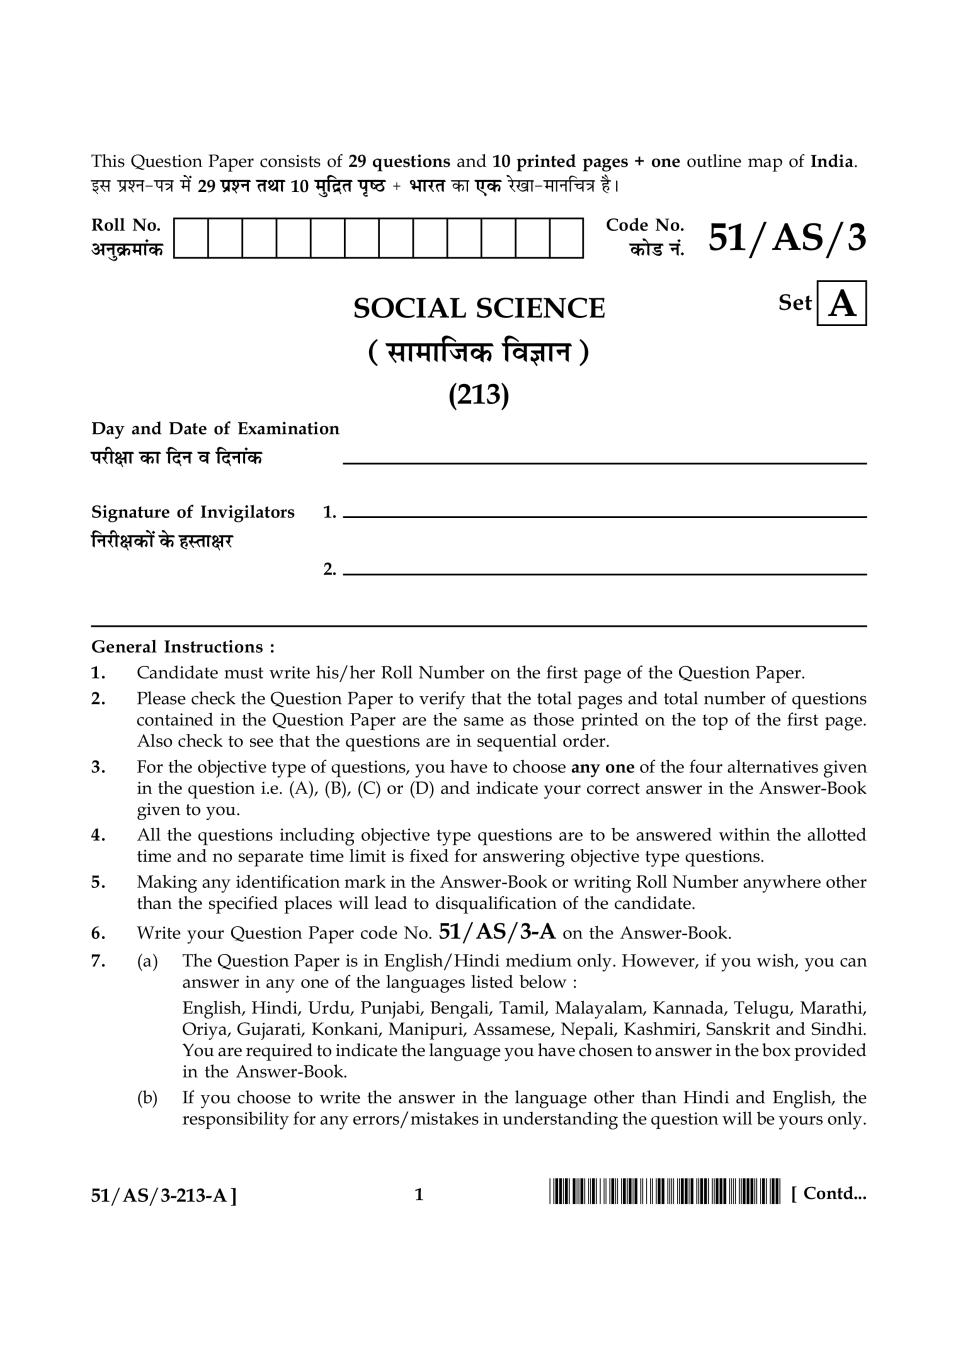 NIOS Class 10 Question Paper Oct 2015 - Social Science - Page 1